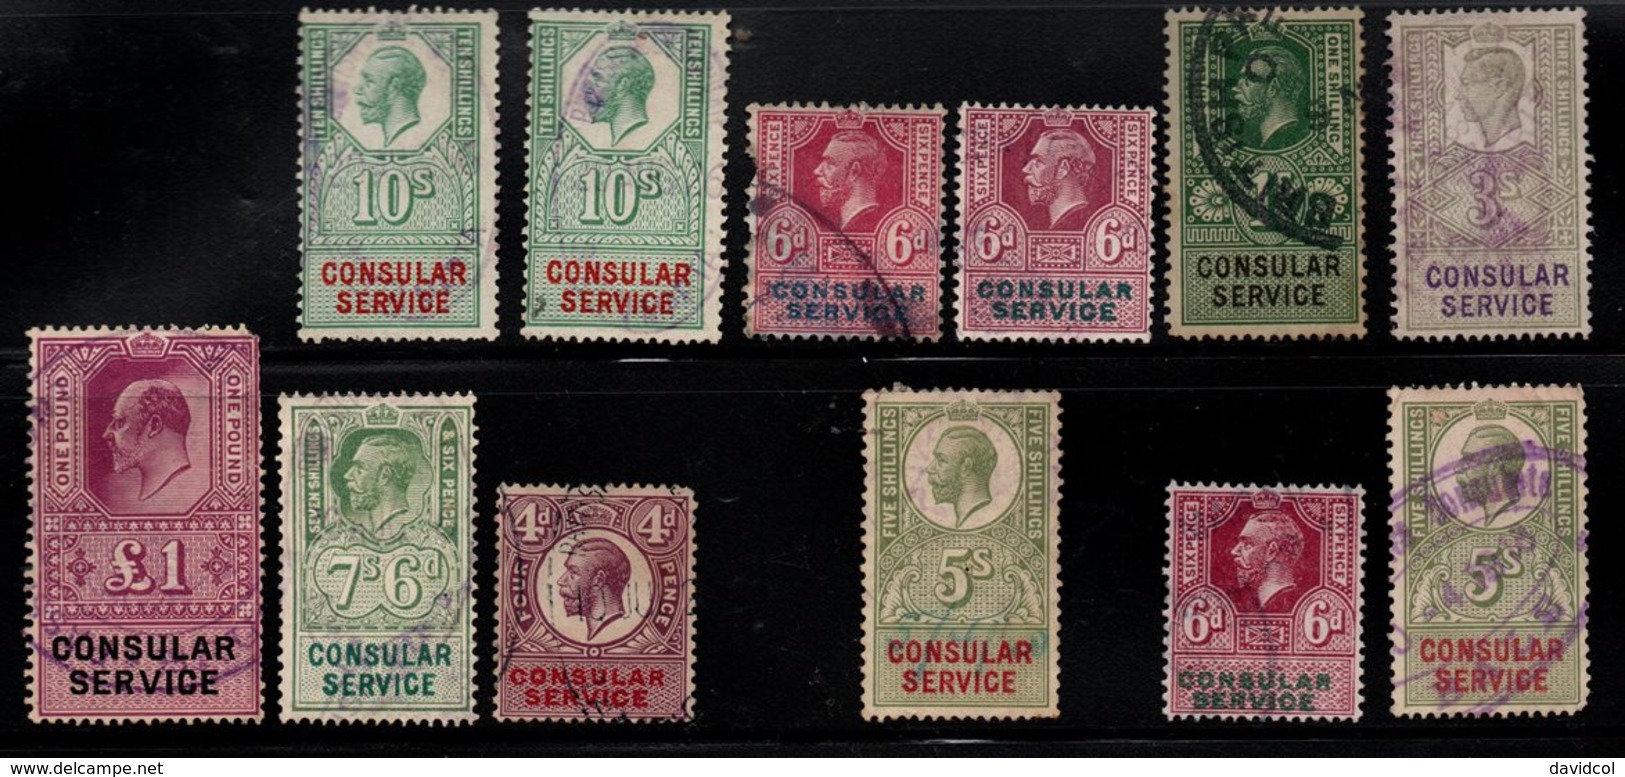 R810 - GREAT BRITAIN. " CONSULAR SERVICE " - USED - LOT X 12 STAMPS - SHADES - - Revenue Stamps